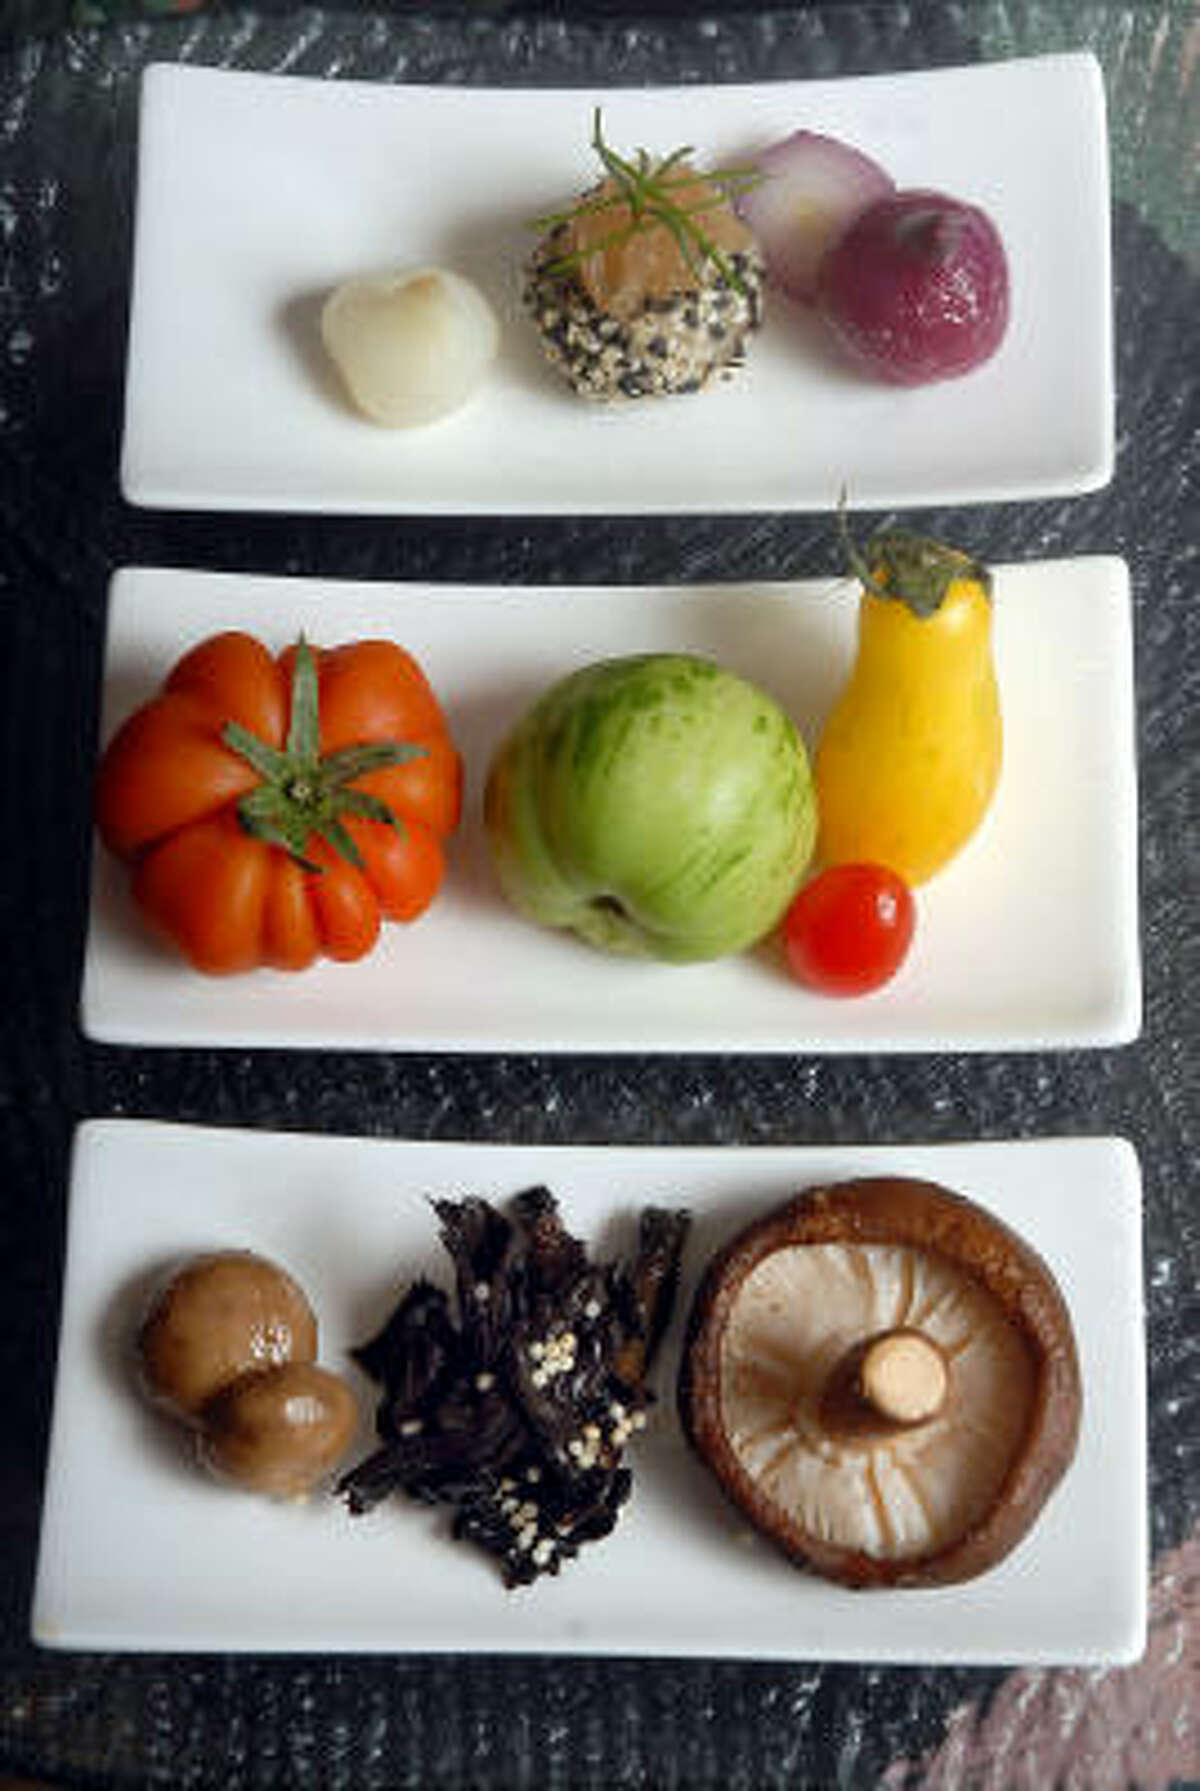 Fresh produce marks chef Robert Gadsby’s creations at Bedford.